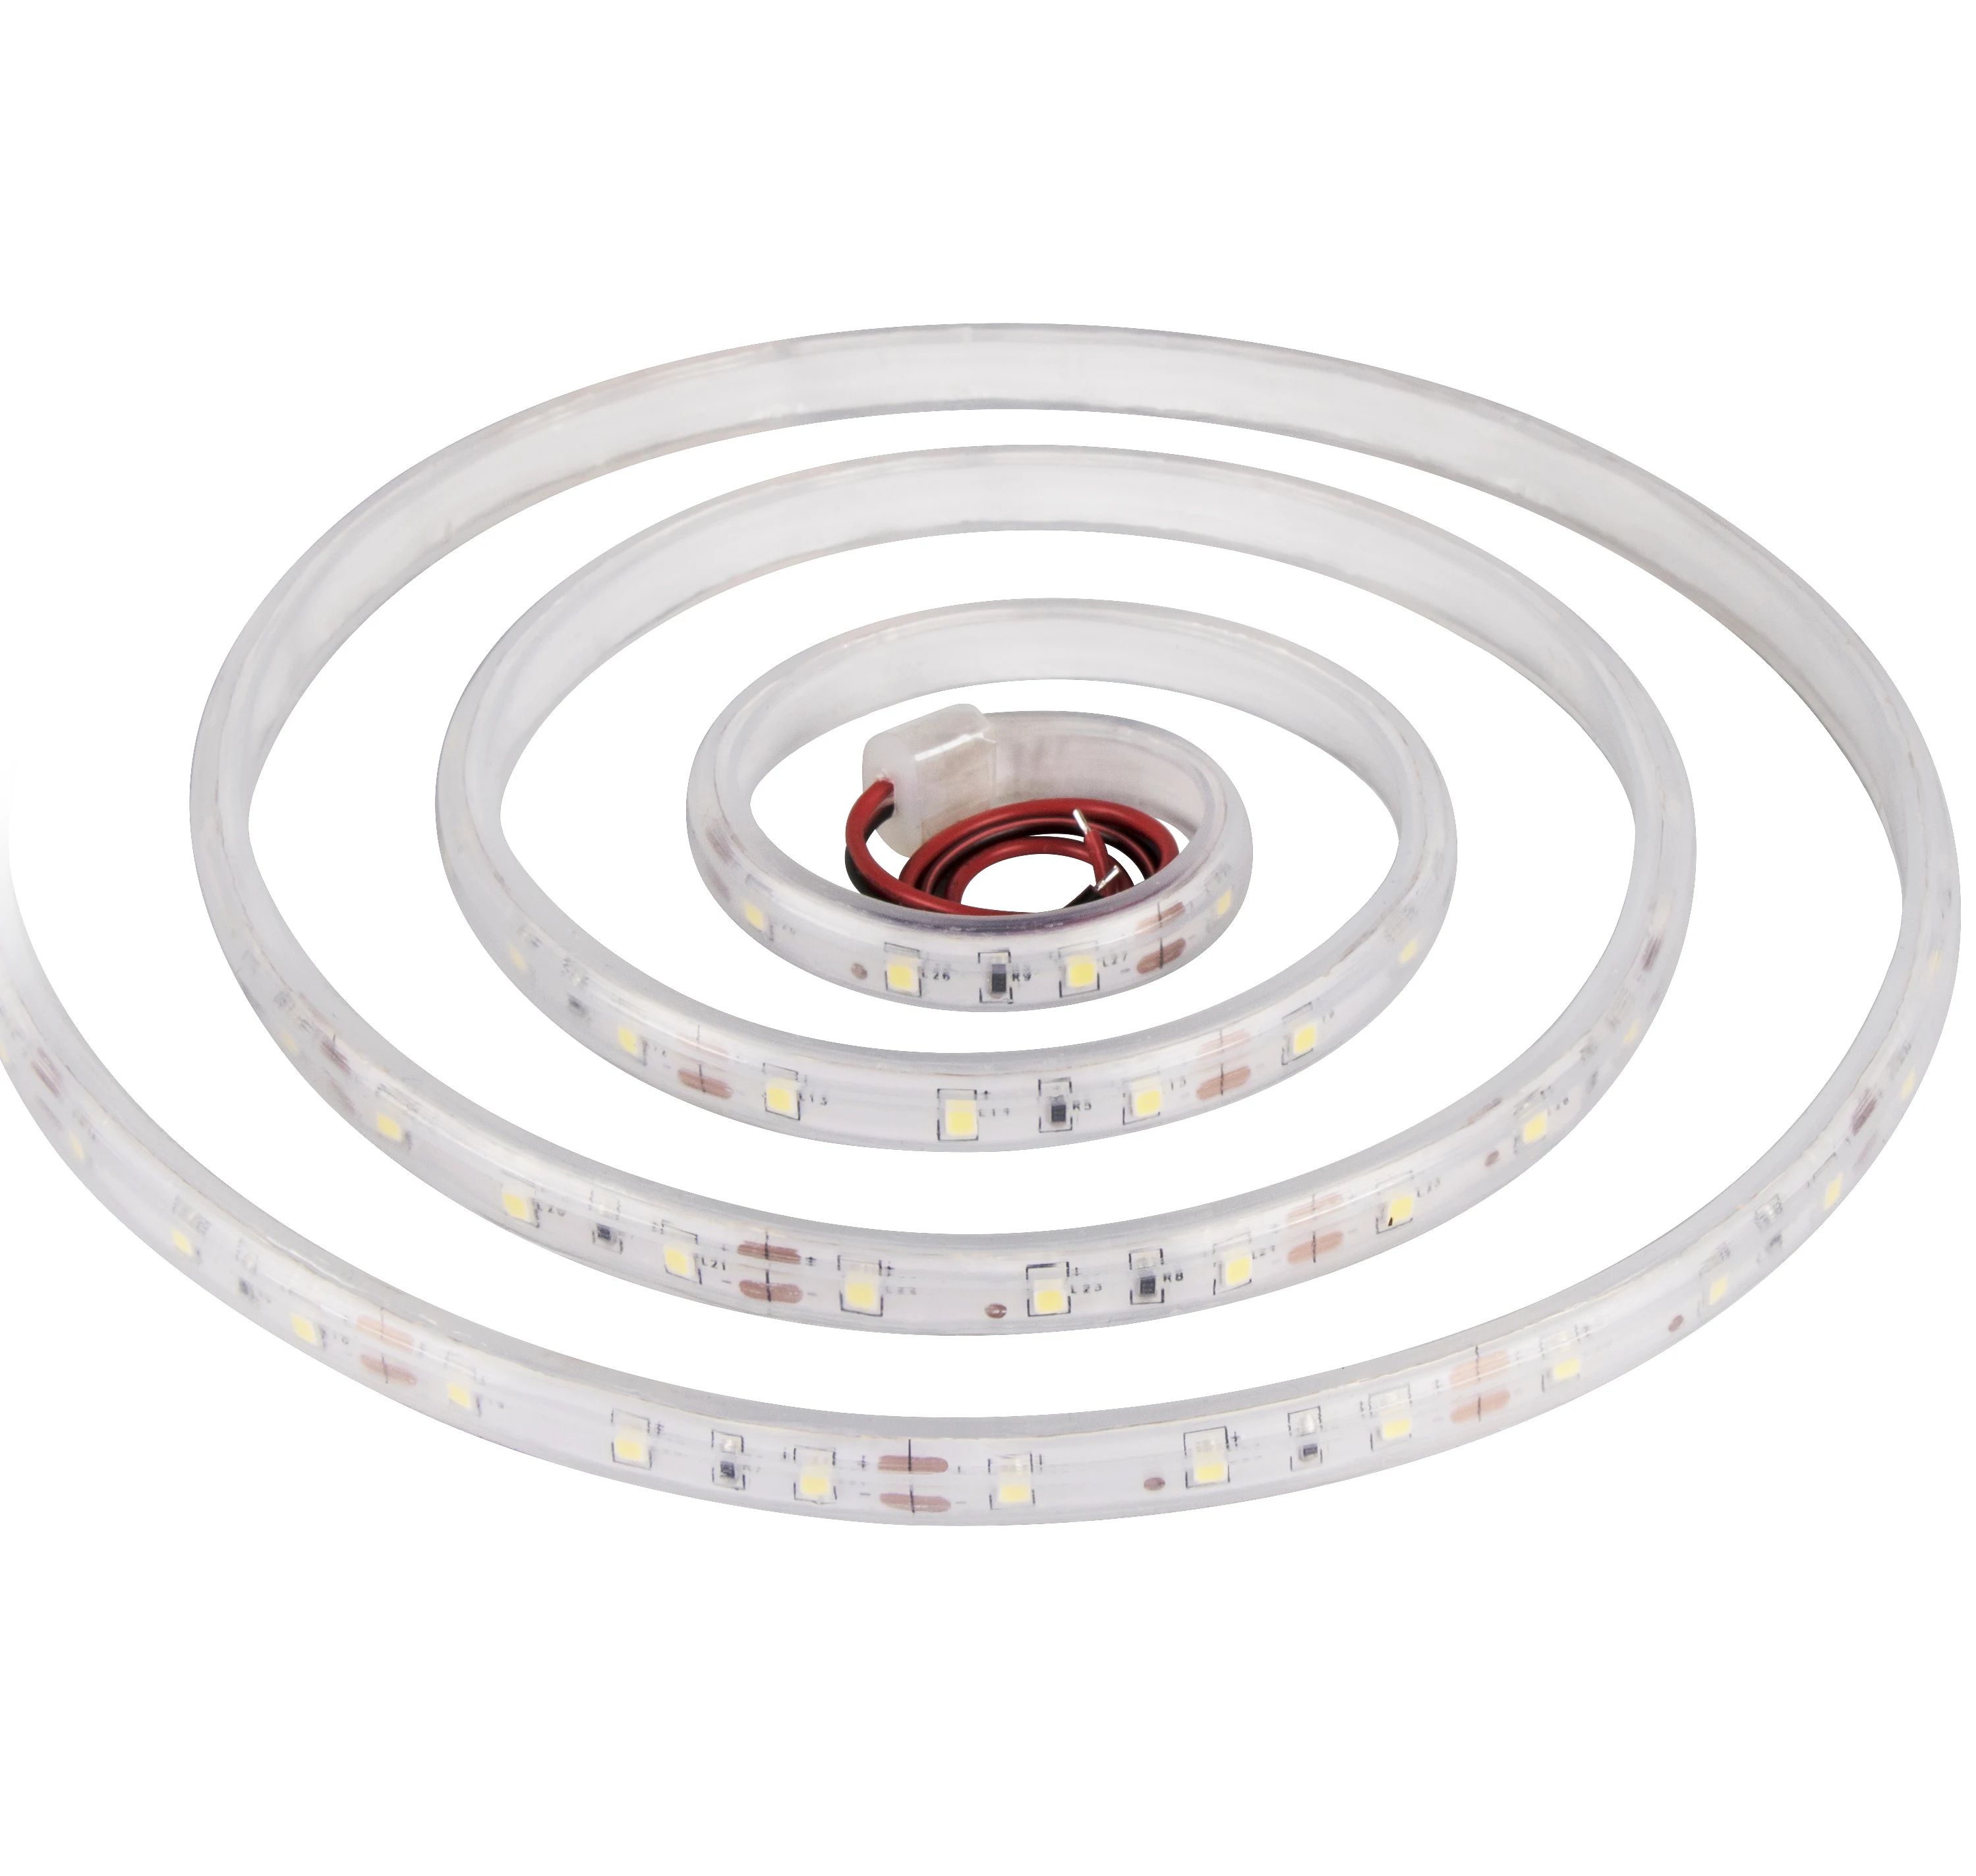 Waterproof SMD2835 LED strip light for project business IP65 silicone tube  single colour RGB RGBW